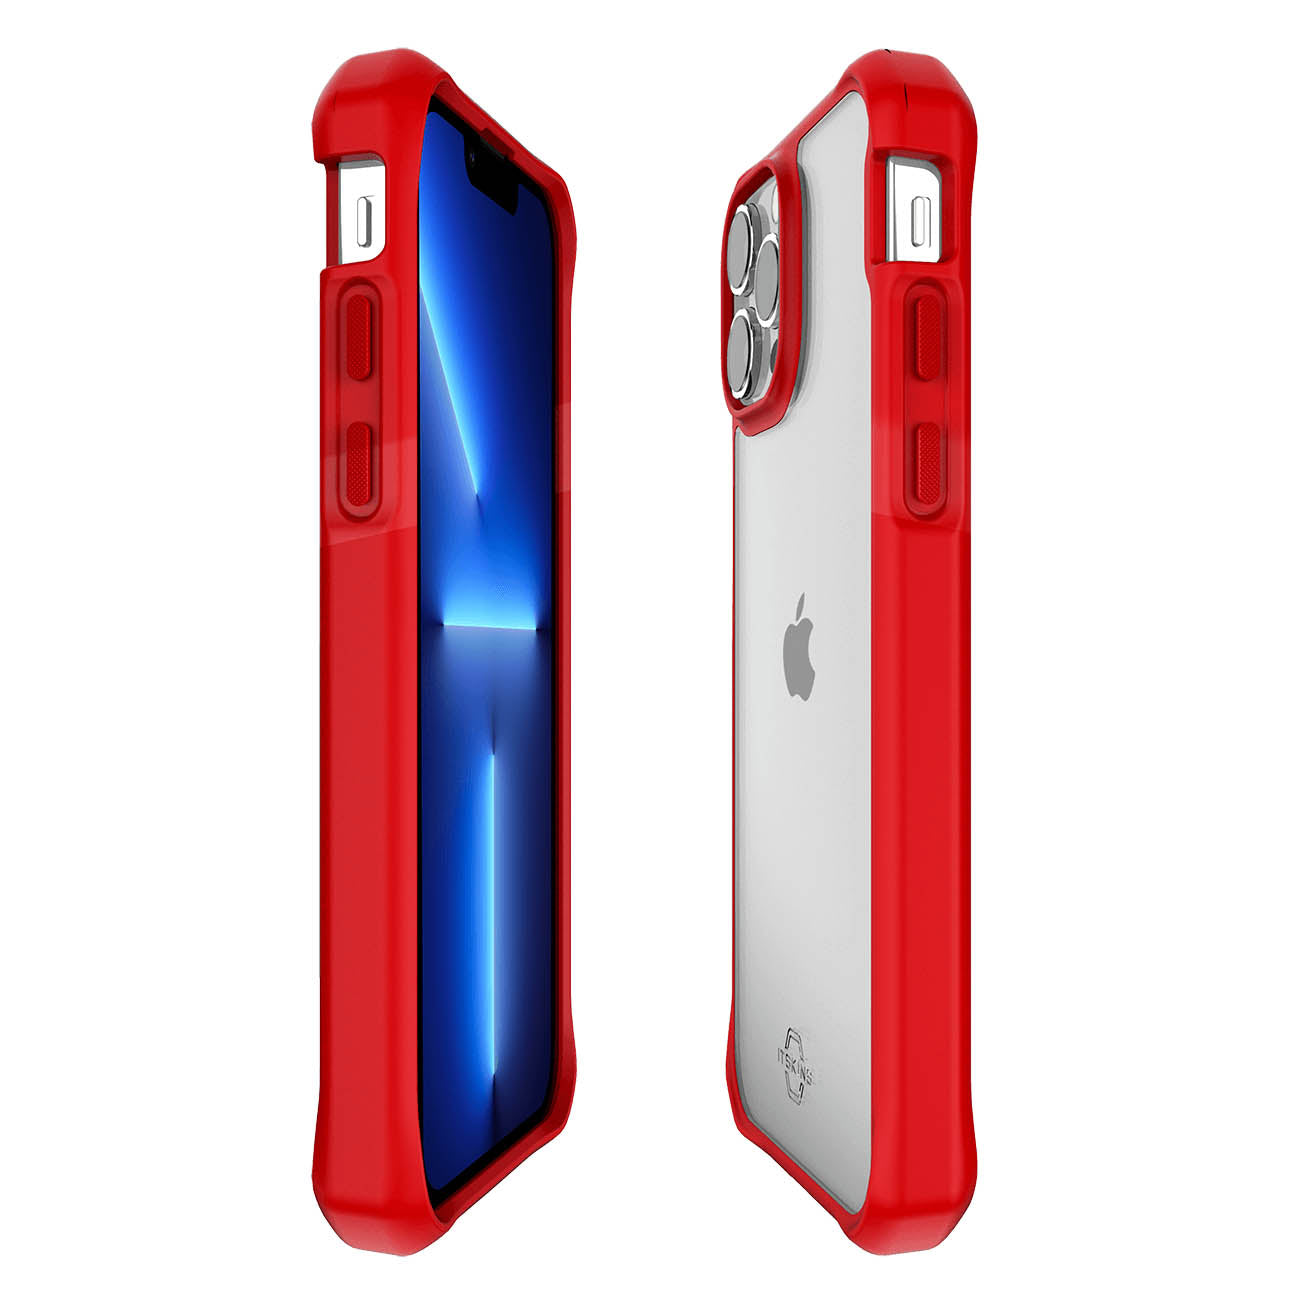 ITSKINS Hybrid Solid Case For iPhone 13 Pro Max / 12 Pro Max - Red/Transparent